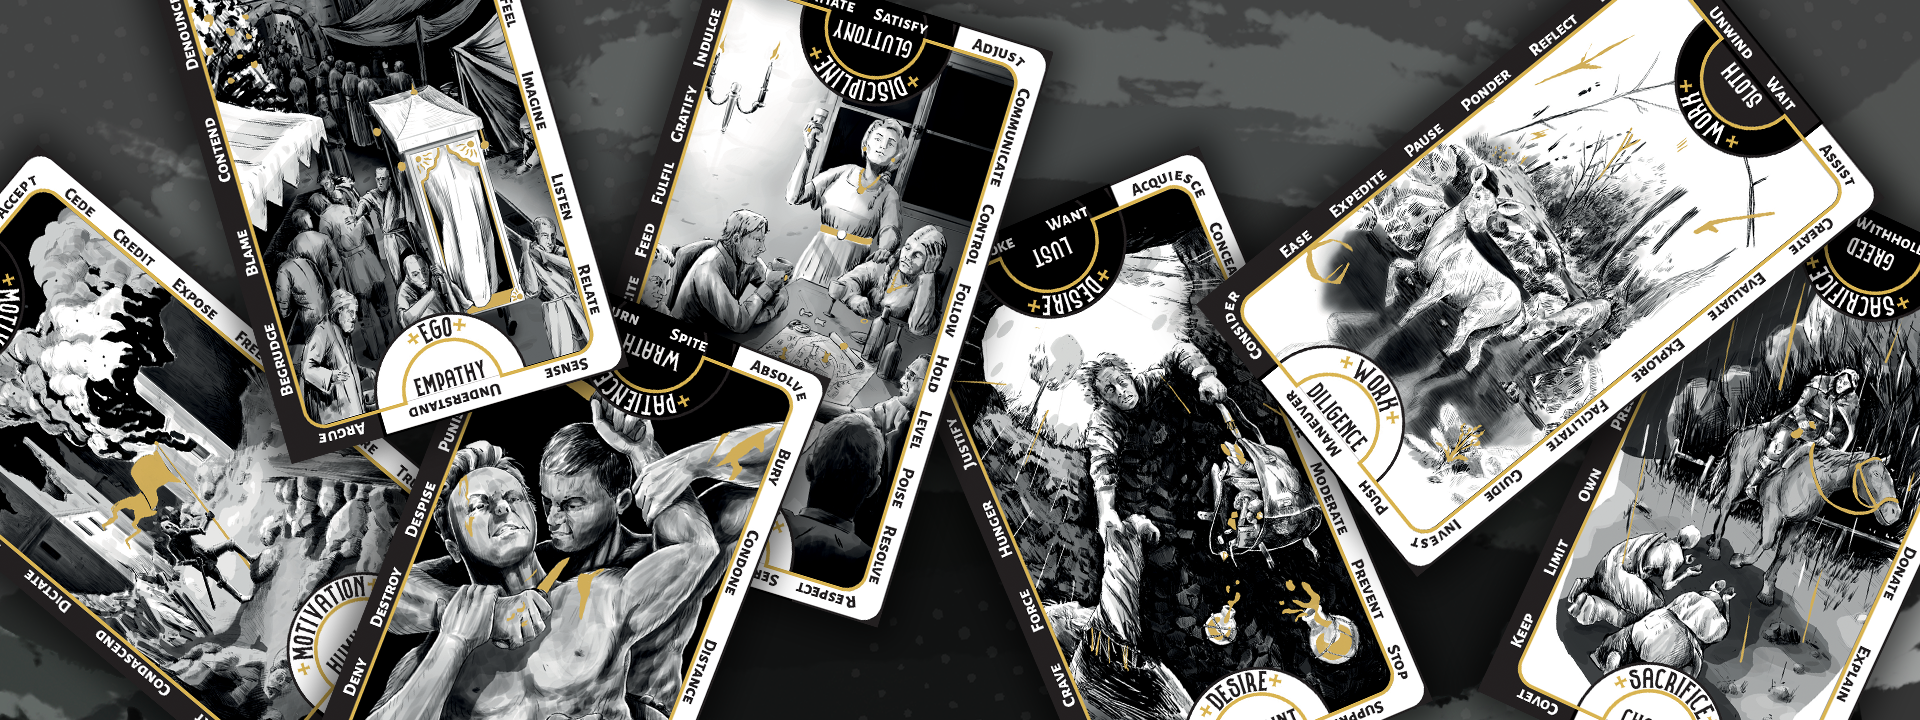 Image shows illustrated cards in black and white dropped over an streaky dark background. The cards focus on dichotomies of vice and virtue, such as Gluttony and Dignity, and Lust and Restraint. These cards are from Vice & Virtue.